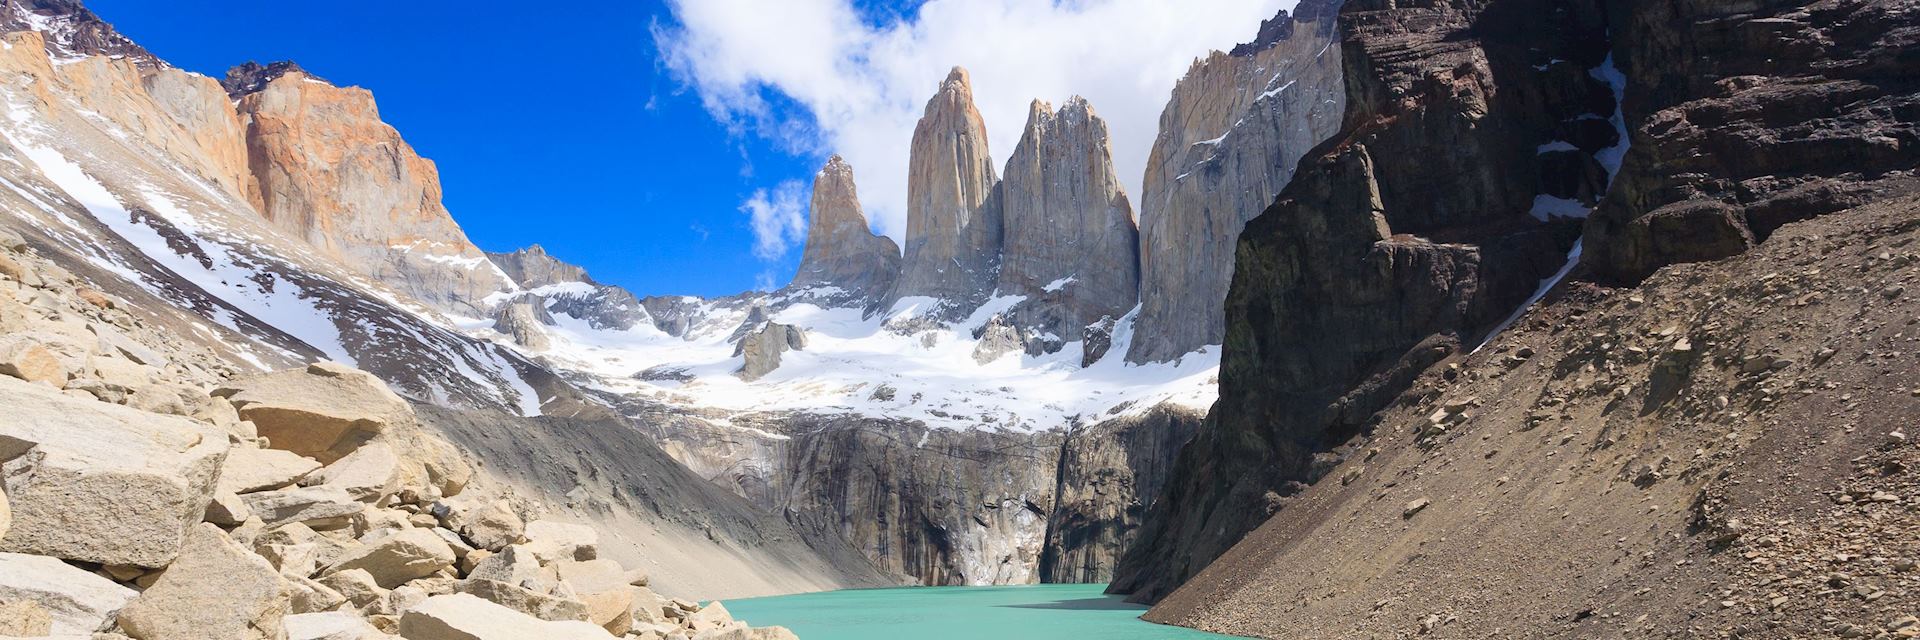 Three Towers, Torres del Paine